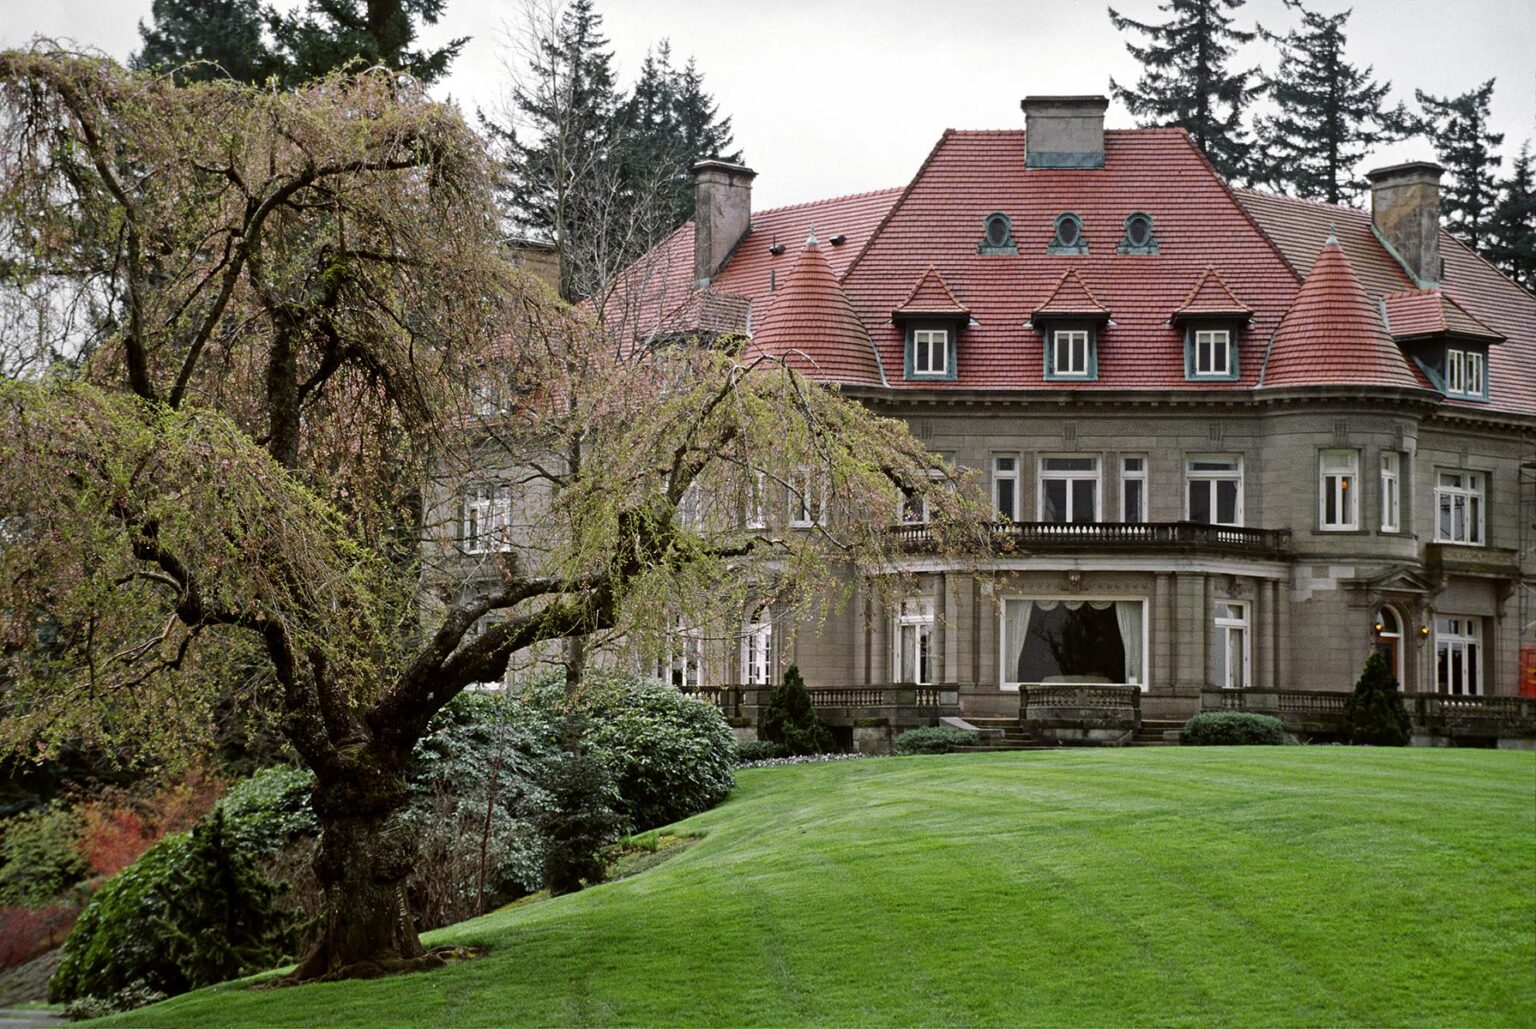 The PITTOCK MANSION in PORTLAND was built by Georgiana & Henry Pittock in 1914 - OREGON